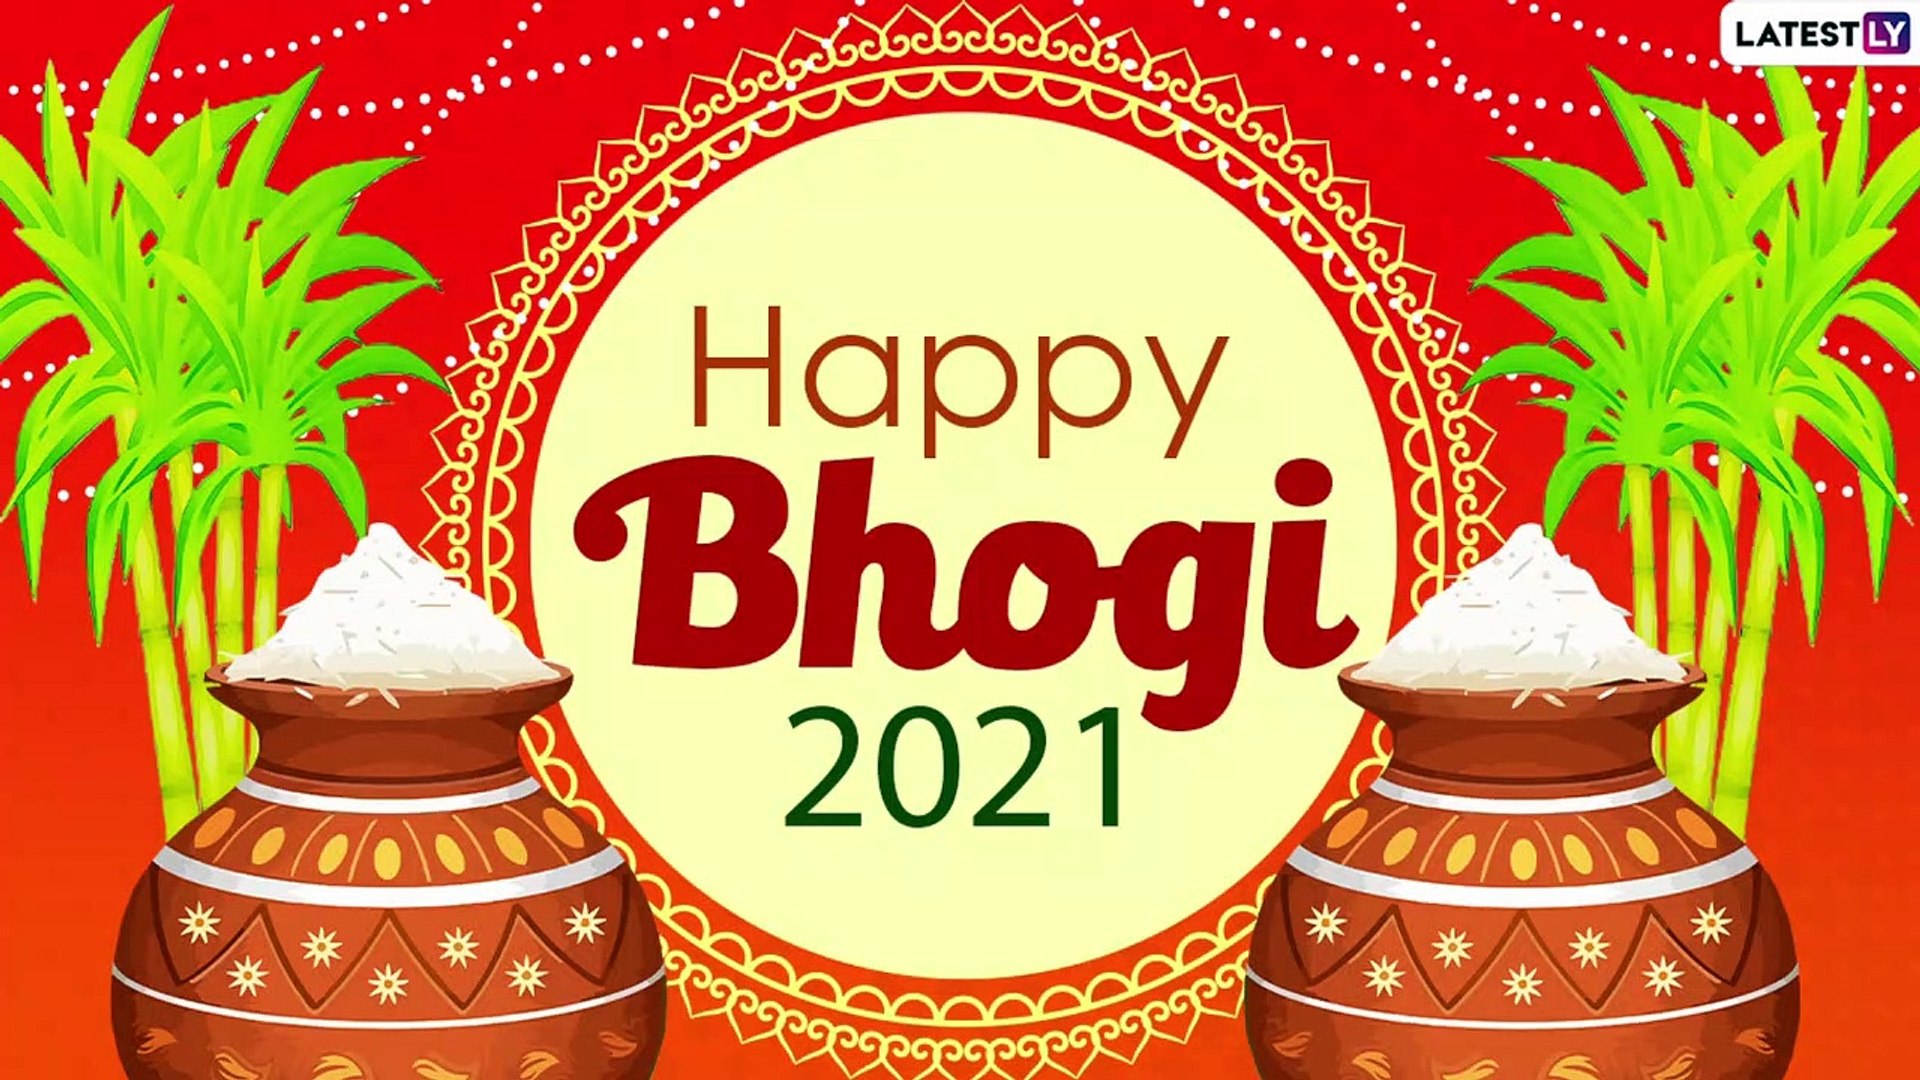 Happy Bhogi 2021 Wishes, Greetings, WhatsApp Messages, Images to Celebrate  the First Day of Pongal - video Dailymotion